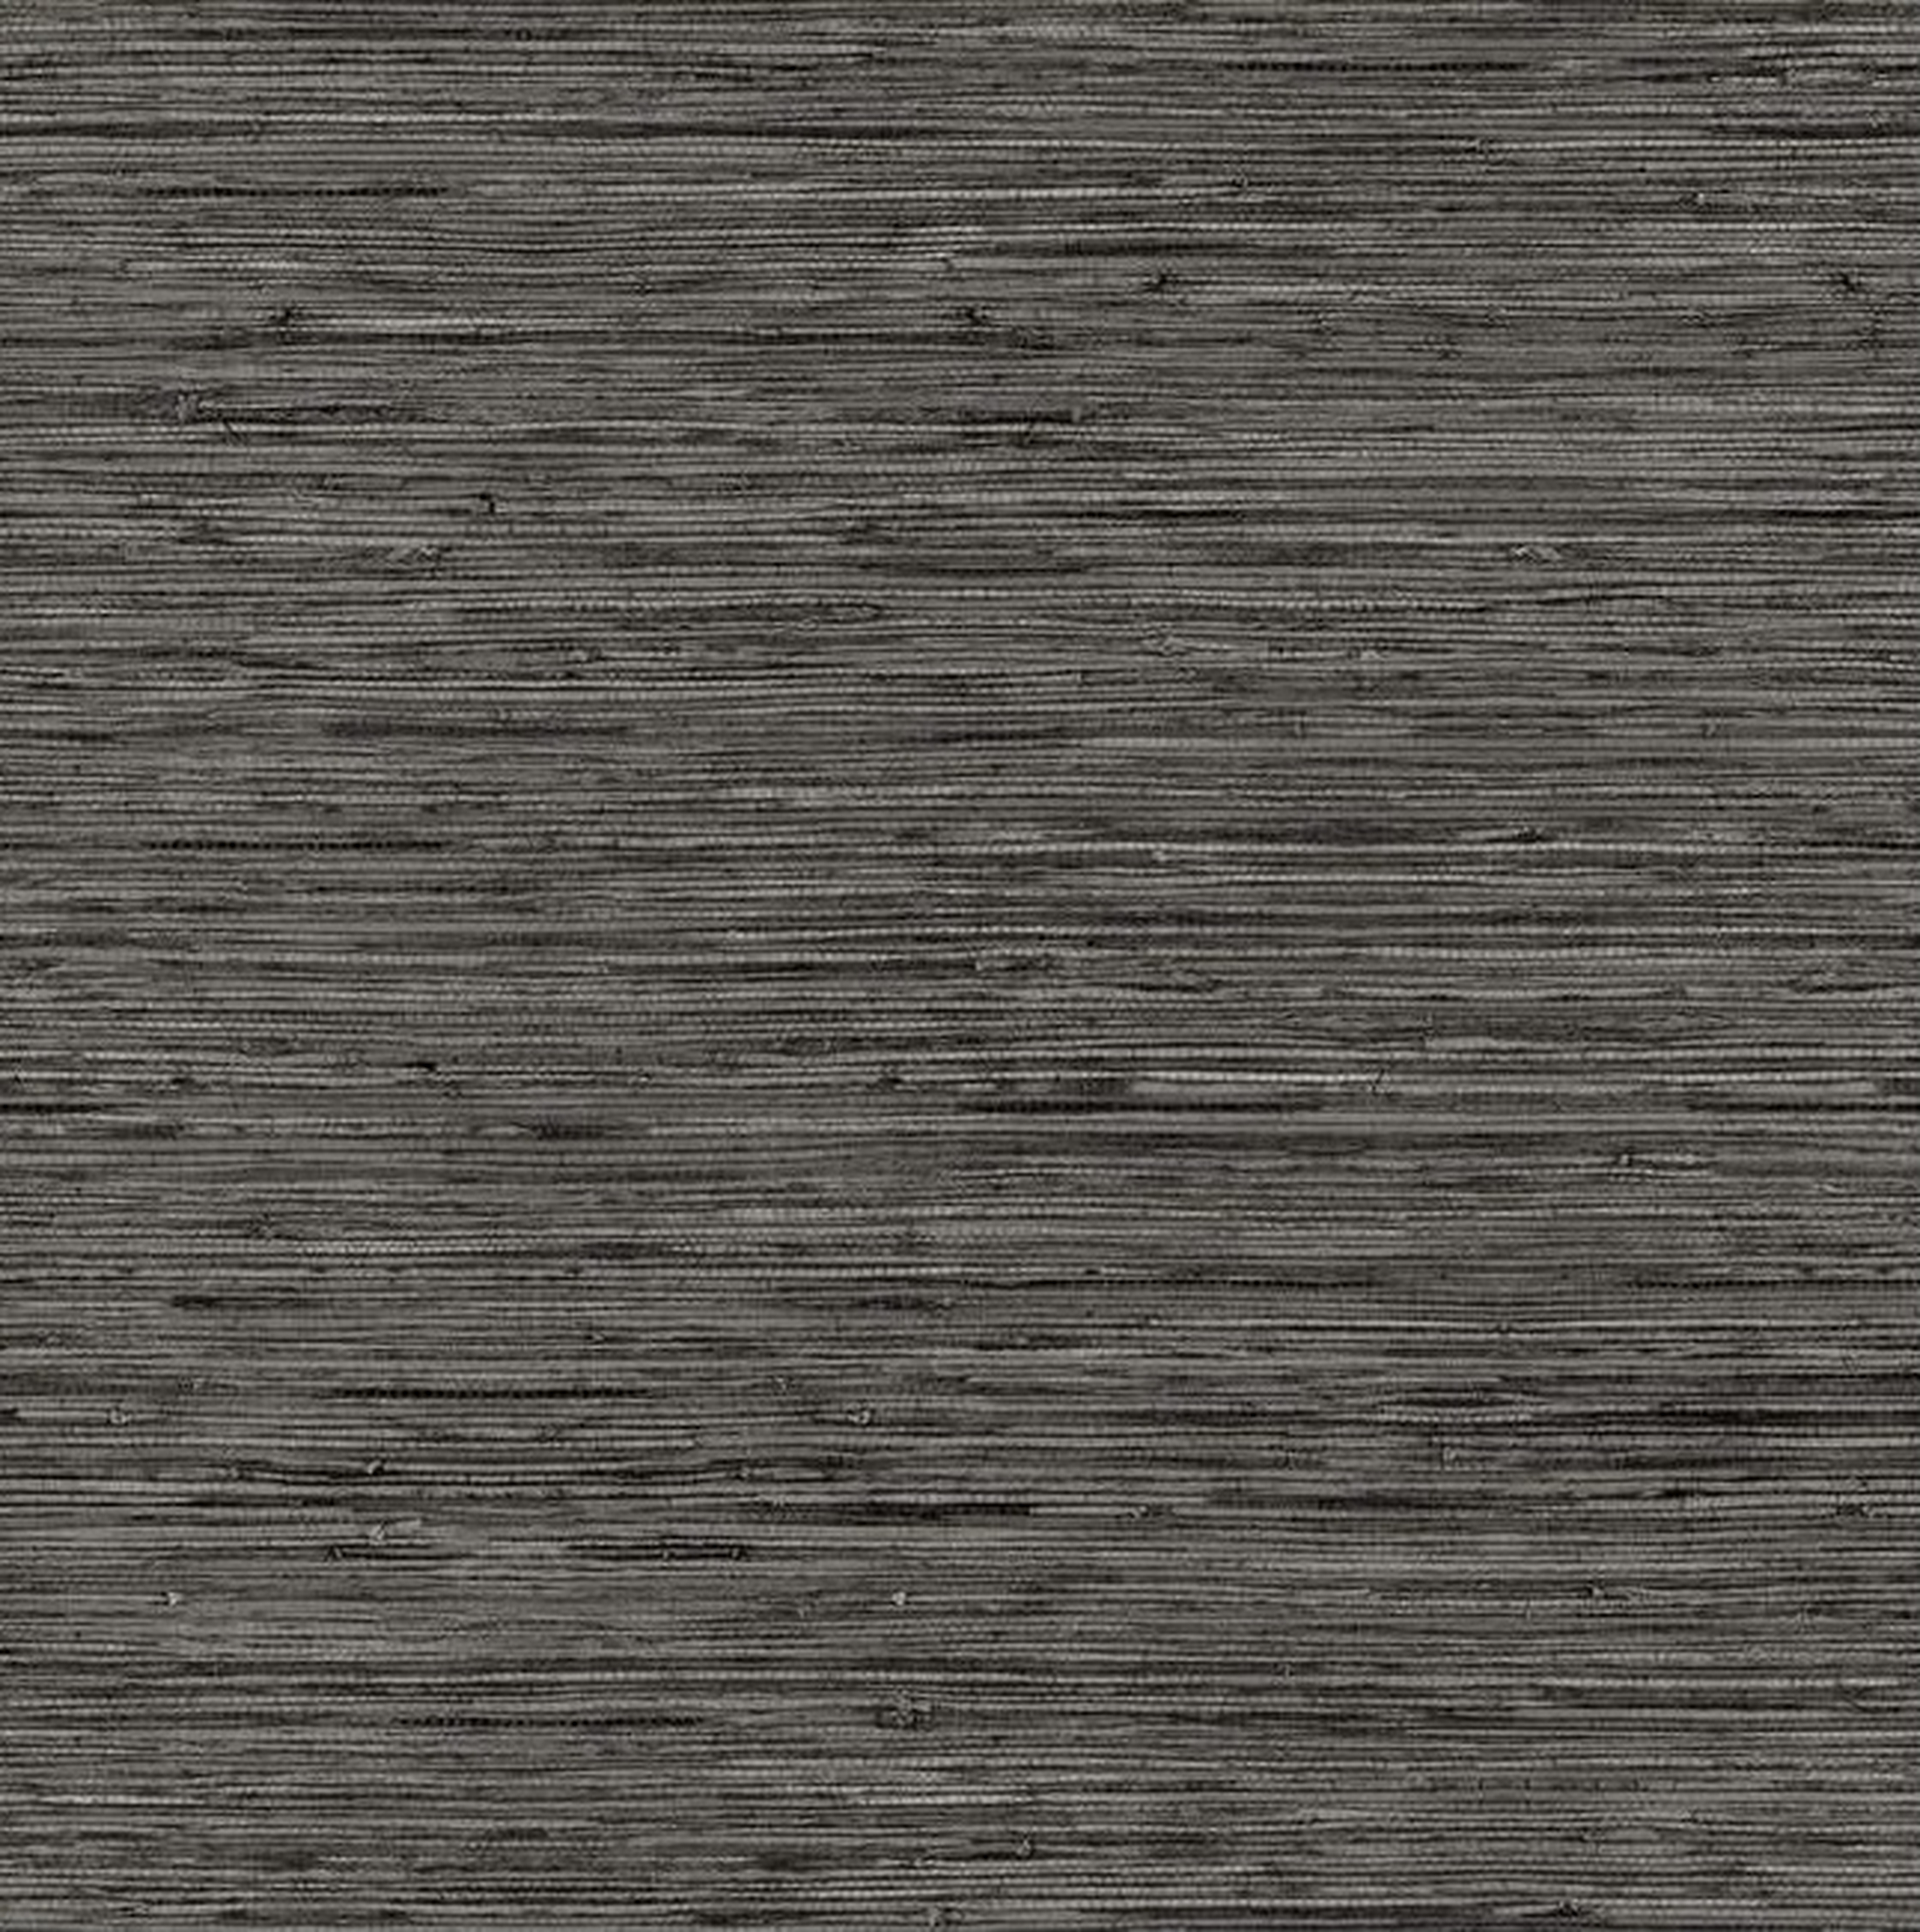 Faux Grasscloth Peel and Stick Wallpaper, Dark Gray - York Wallcoverings